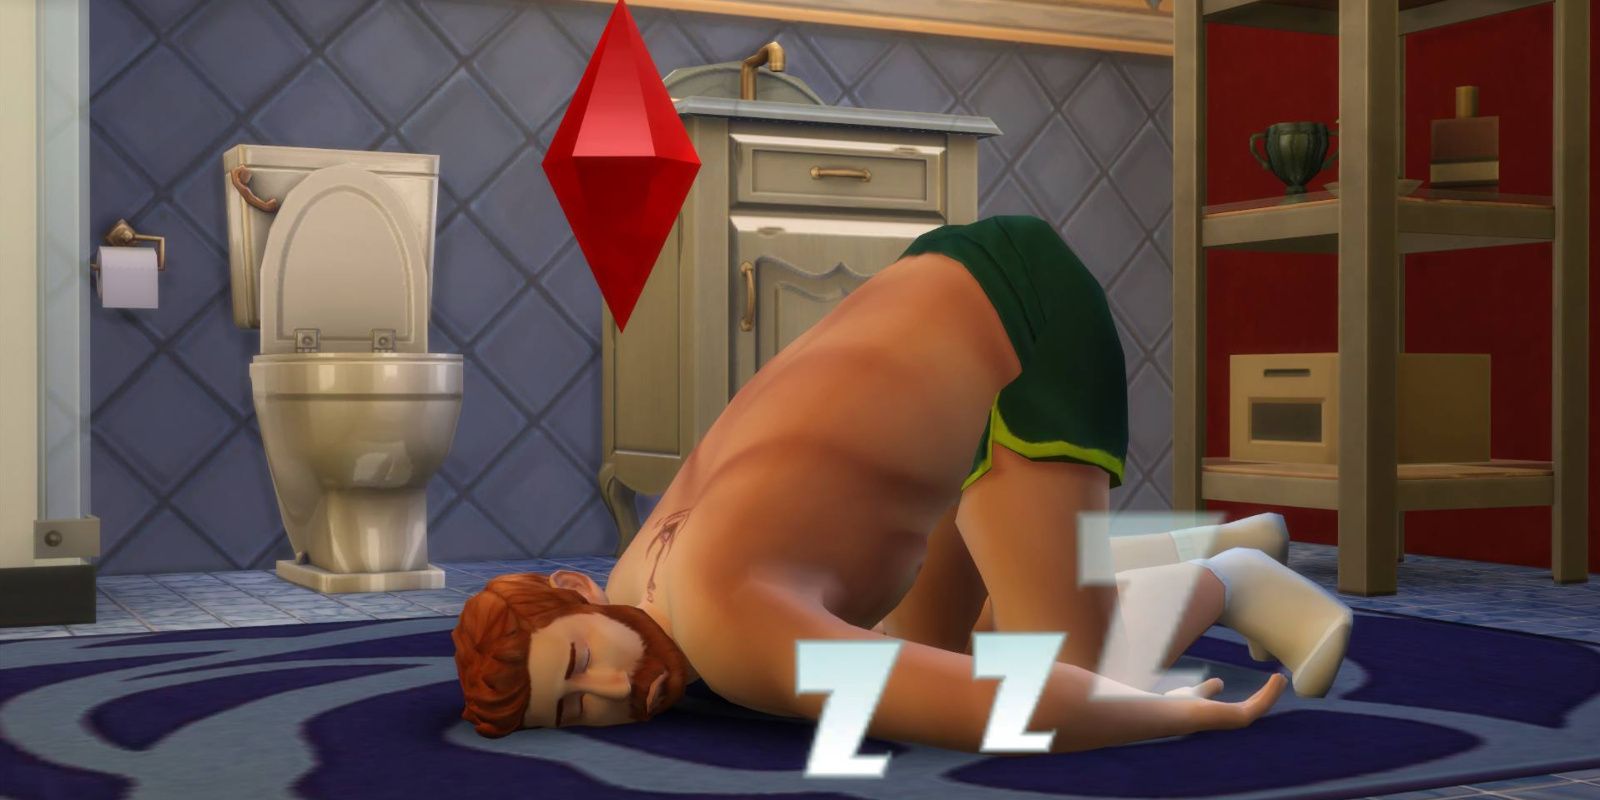 An exhausted Sim falls asleep on the floor in Sims 4